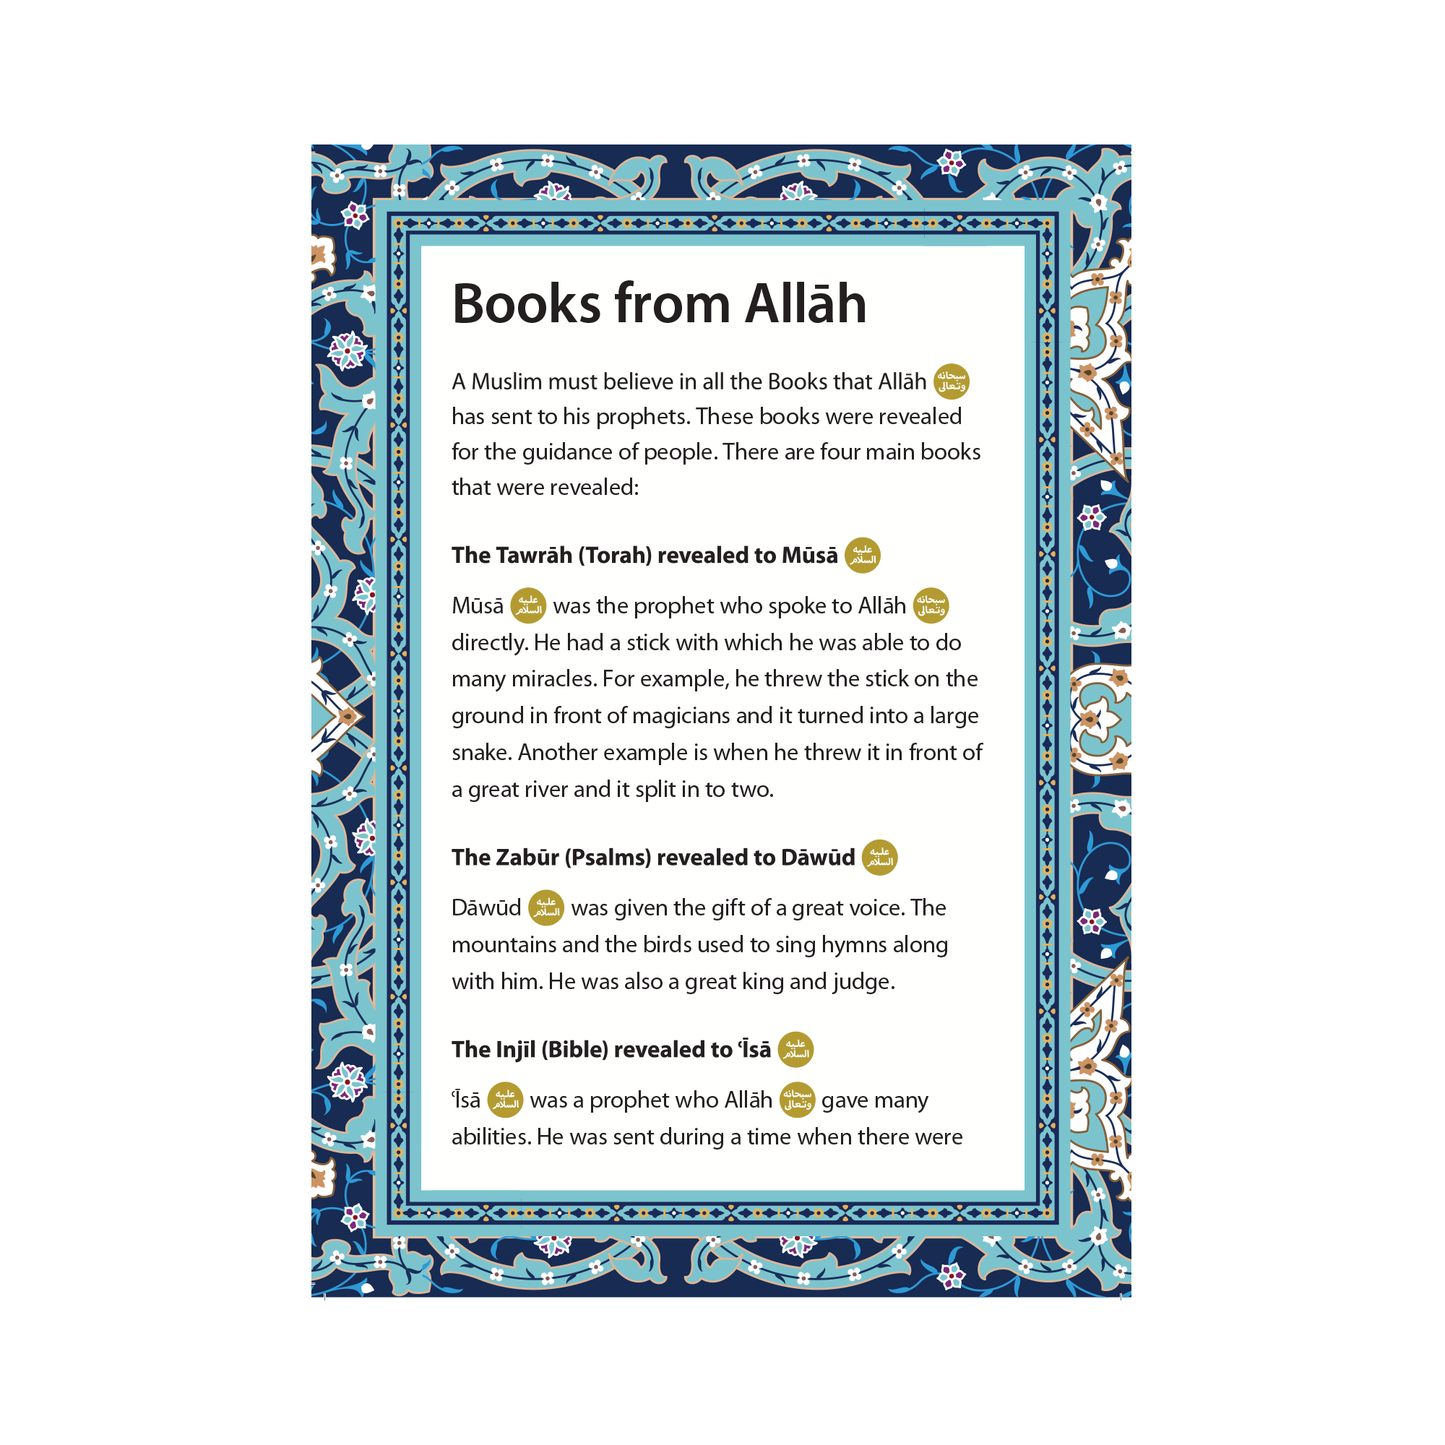 Islamic Studies: Textbook 3 – Learn about Islam Series by Safar